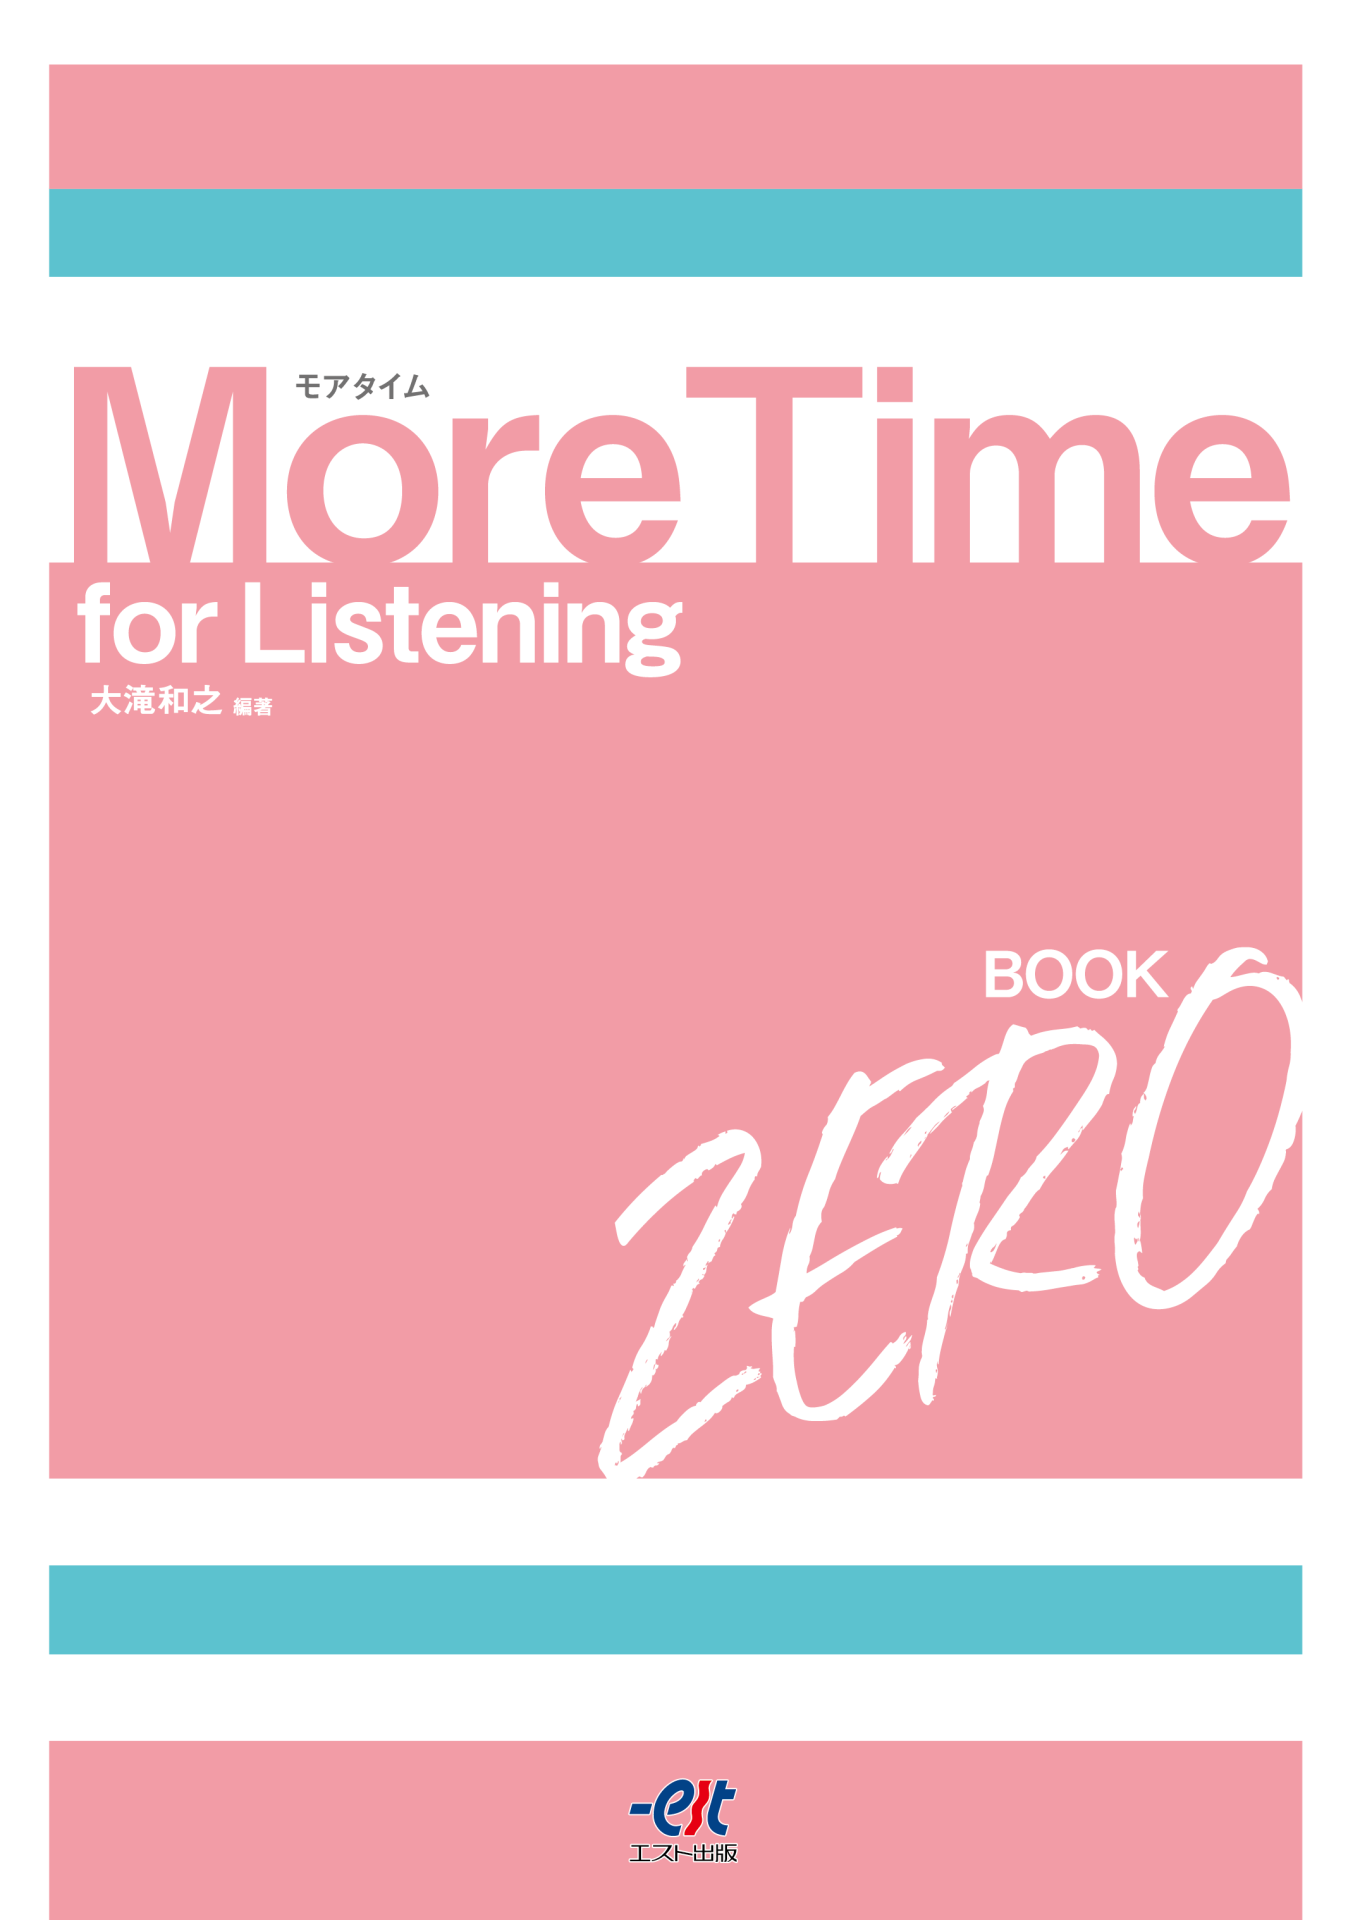 More Time for Listening BOOK ZERO - 株式会社エスト出版